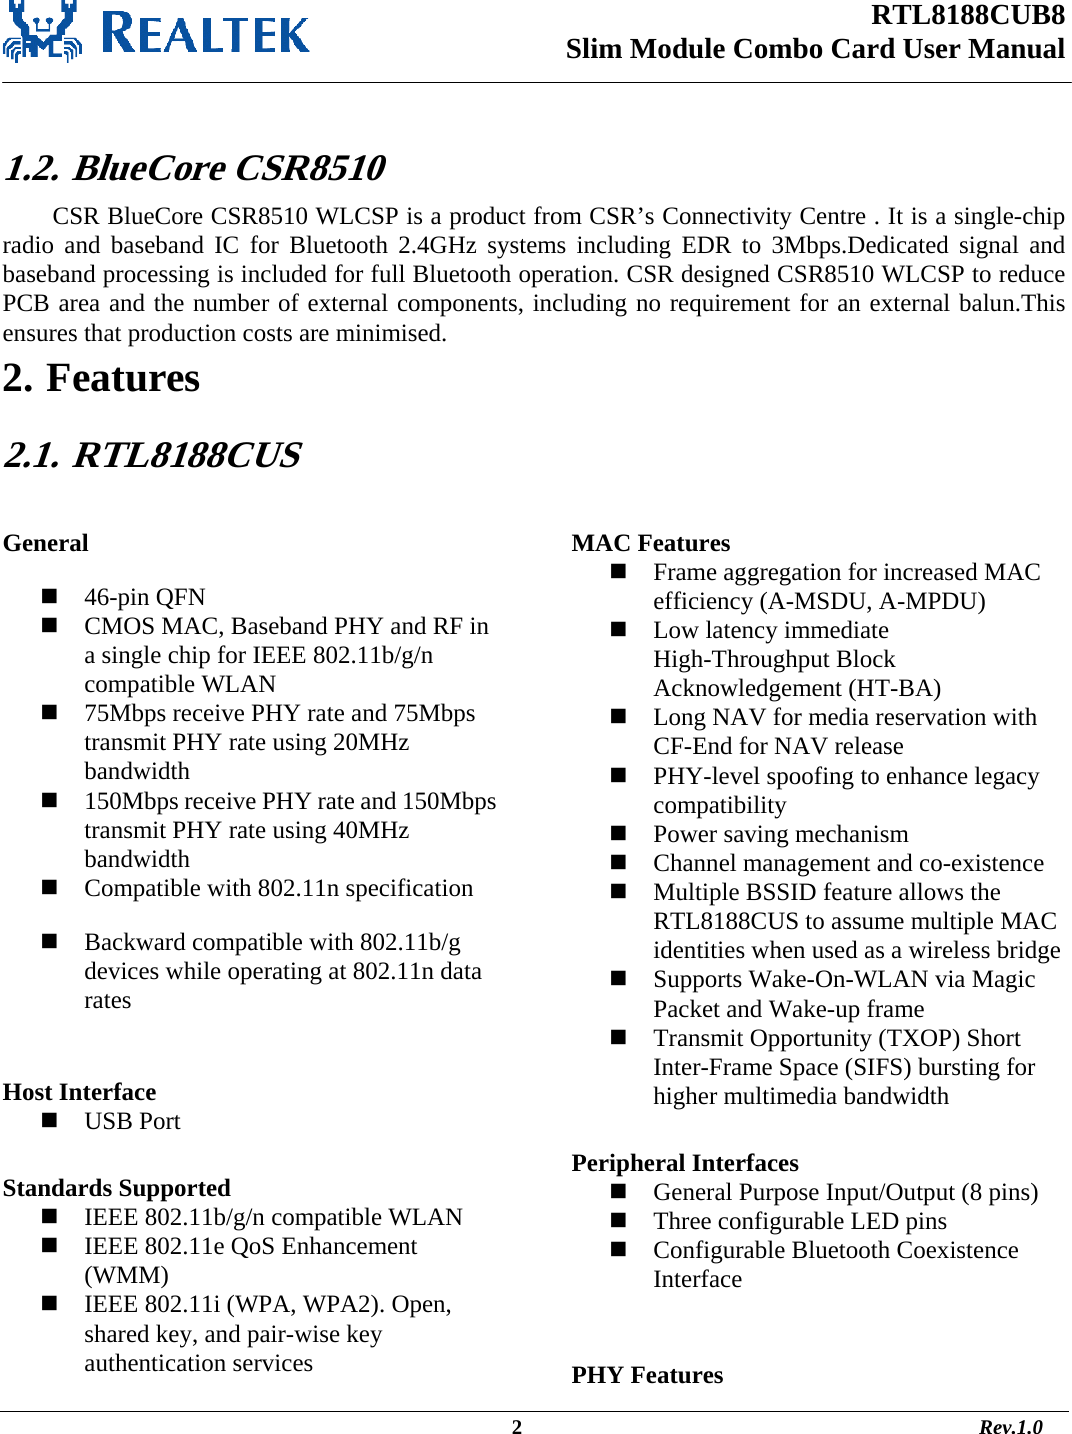 RTL8188CUB8 Slim Module Combo Card User Manual                                                                                                  2                                                                                       Rev.1.0   1.2.  BlueCore CSR8510 CSR BlueCore CSR8510 WLCSP is a product from CSR’s Connectivity Centre . It is a single-chip radio and baseband IC for Bluetooth 2.4GHz systems including EDR to 3Mbps.Dedicated signal and baseband processing is included for full Bluetooth operation. CSR designed CSR8510 WLCSP to reduce PCB area and the number of external components, including no requirement for an external balun.This ensures that production costs are minimised.  2. Features 2.1.   RTL8188CUS  General  46-pin QFN  CMOS MAC, Baseband PHY and RF in a single chip for IEEE 802.11b/g/n compatible WLAN  75Mbps receive PHY rate and 75Mbps transmit PHY rate using 20MHz bandwidth  150Mbps receive PHY rate and 150Mbps transmit PHY rate using 40MHz bandwidth  Compatible with 802.11n specification  Backward compatible with 802.11b/g devices while operating at 802.11n data rates  Host Interface  USB Port  Standards Supported  IEEE 802.11b/g/n compatible WLAN  IEEE 802.11e QoS Enhancement (WMM)  IEEE 802.11i (WPA, WPA2). Open, shared key, and pair-wise key authentication services  MAC Features  Frame aggregation for increased MAC efficiency (A-MSDU, A-MPDU)  Low latency immediate High-Throughput Block Acknowledgement (HT-BA)  Long NAV for media reservation with CF-End for NAV release  PHY-level spoofing to enhance legacy compatibility  Power saving mechanism  Channel management and co-existence  Multiple BSSID feature allows the RTL8188CUS to assume multiple MAC identities when used as a wireless bridge  Supports Wake-On-WLAN via Magic Packet and Wake-up frame  Transmit Opportunity (TXOP) Short Inter-Frame Space (SIFS) bursting for higher multimedia bandwidth  Peripheral Interfaces  General Purpose Input/Output (8 pins)  Three configurable LED pins  Configurable Bluetooth Coexistence Interface   PHY Features 